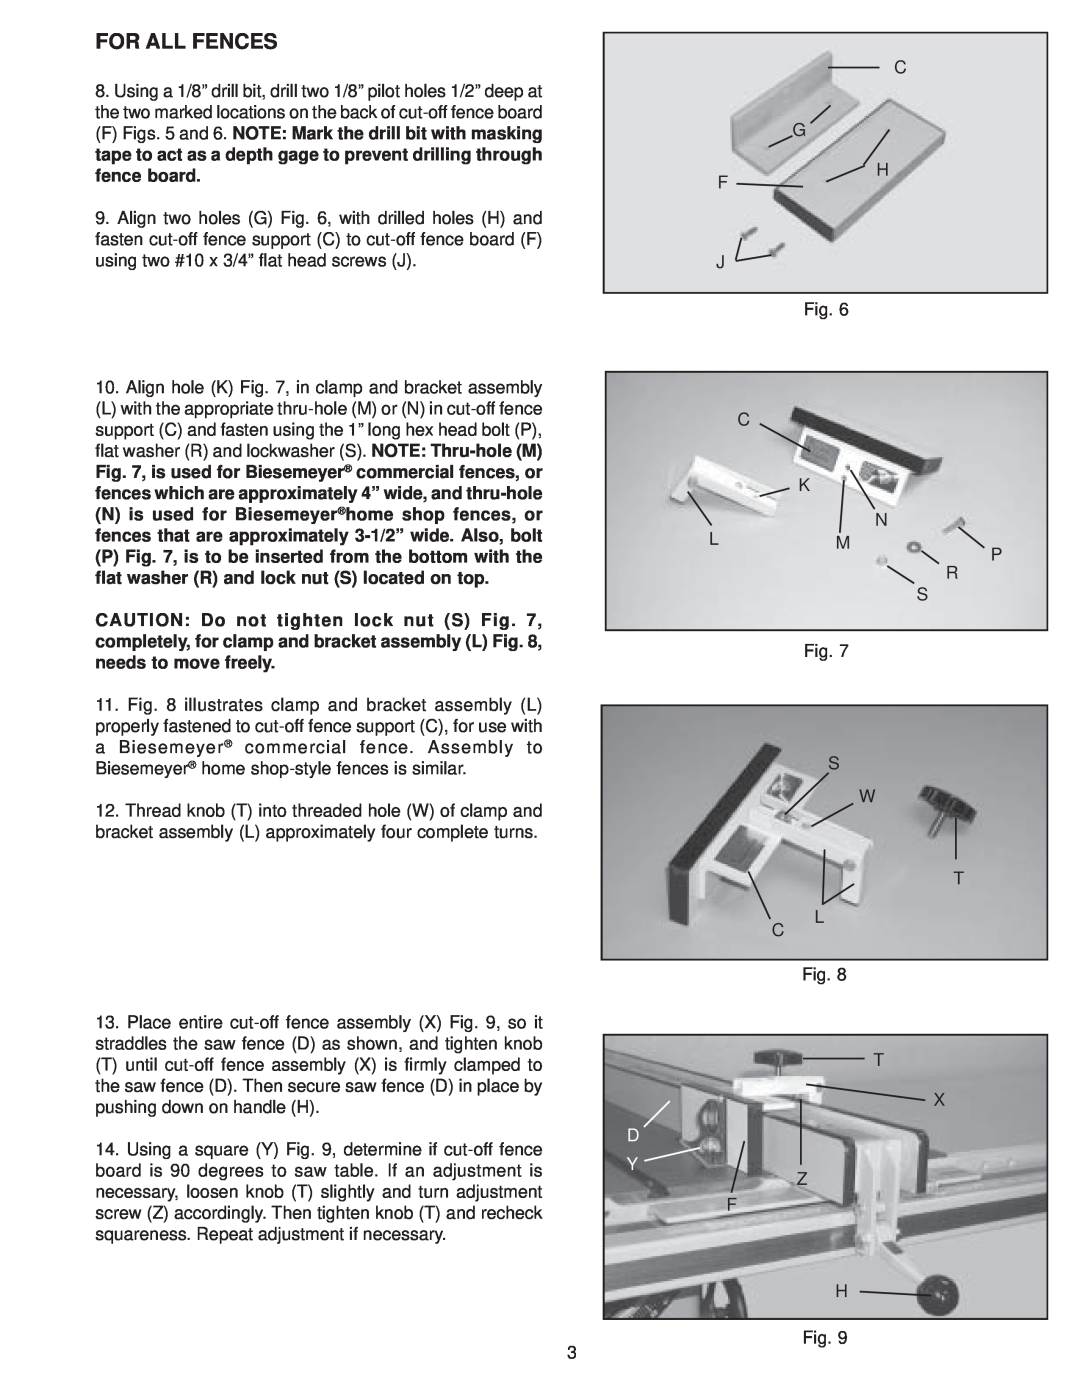 Delta 78-939 manual For All Fences 